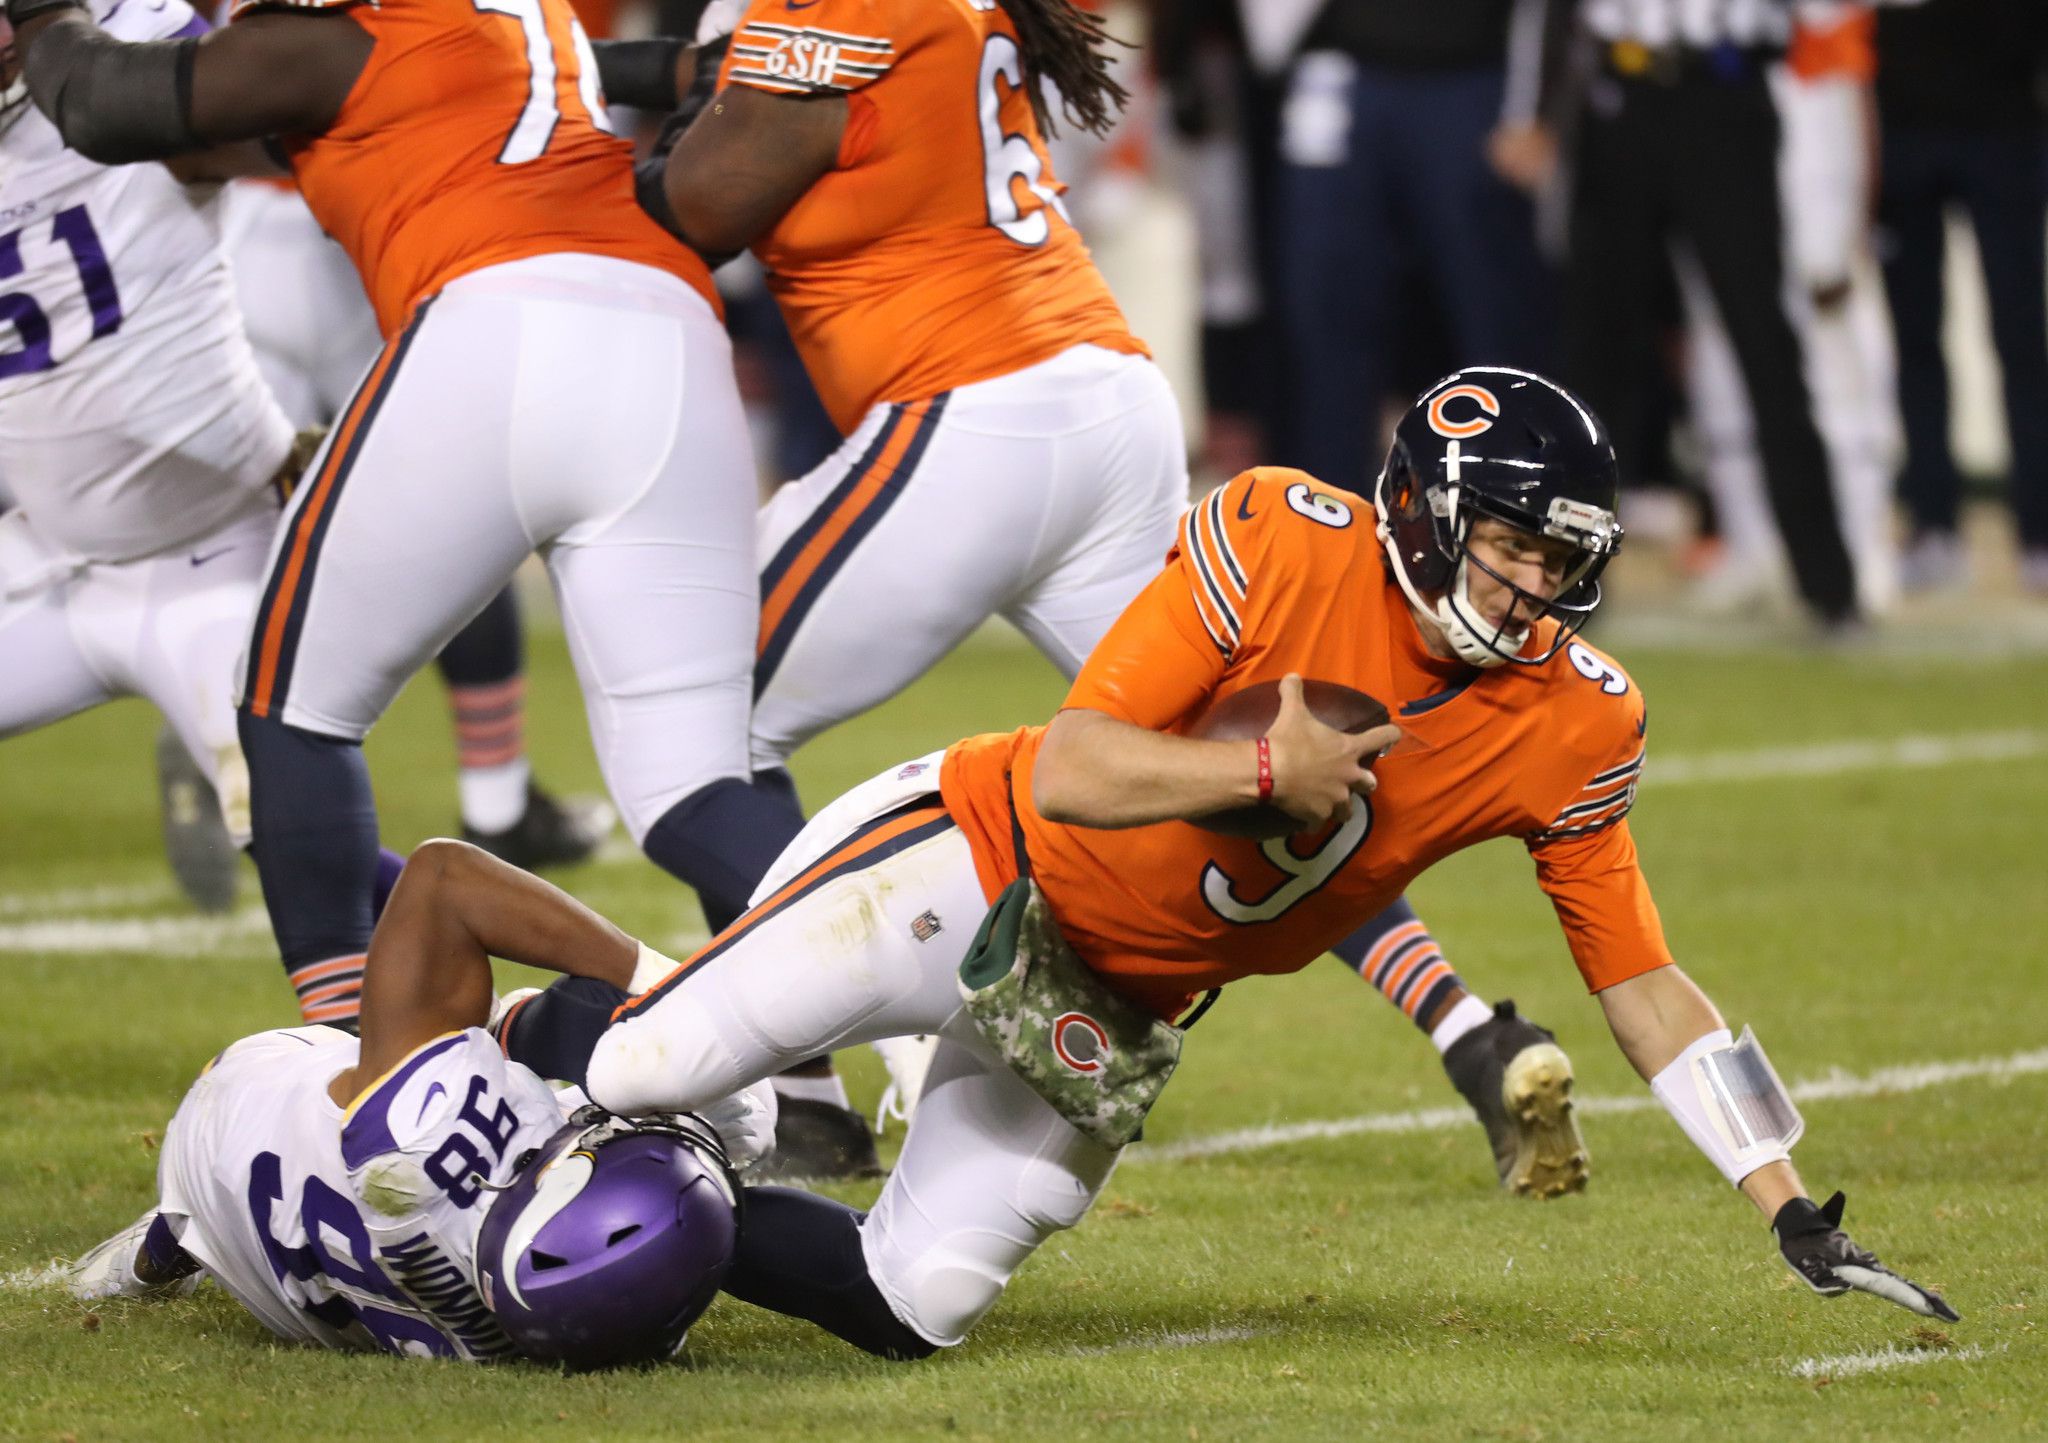 Cousins, Hicks lead way as Vikings knock out Fields, beat Bears 19